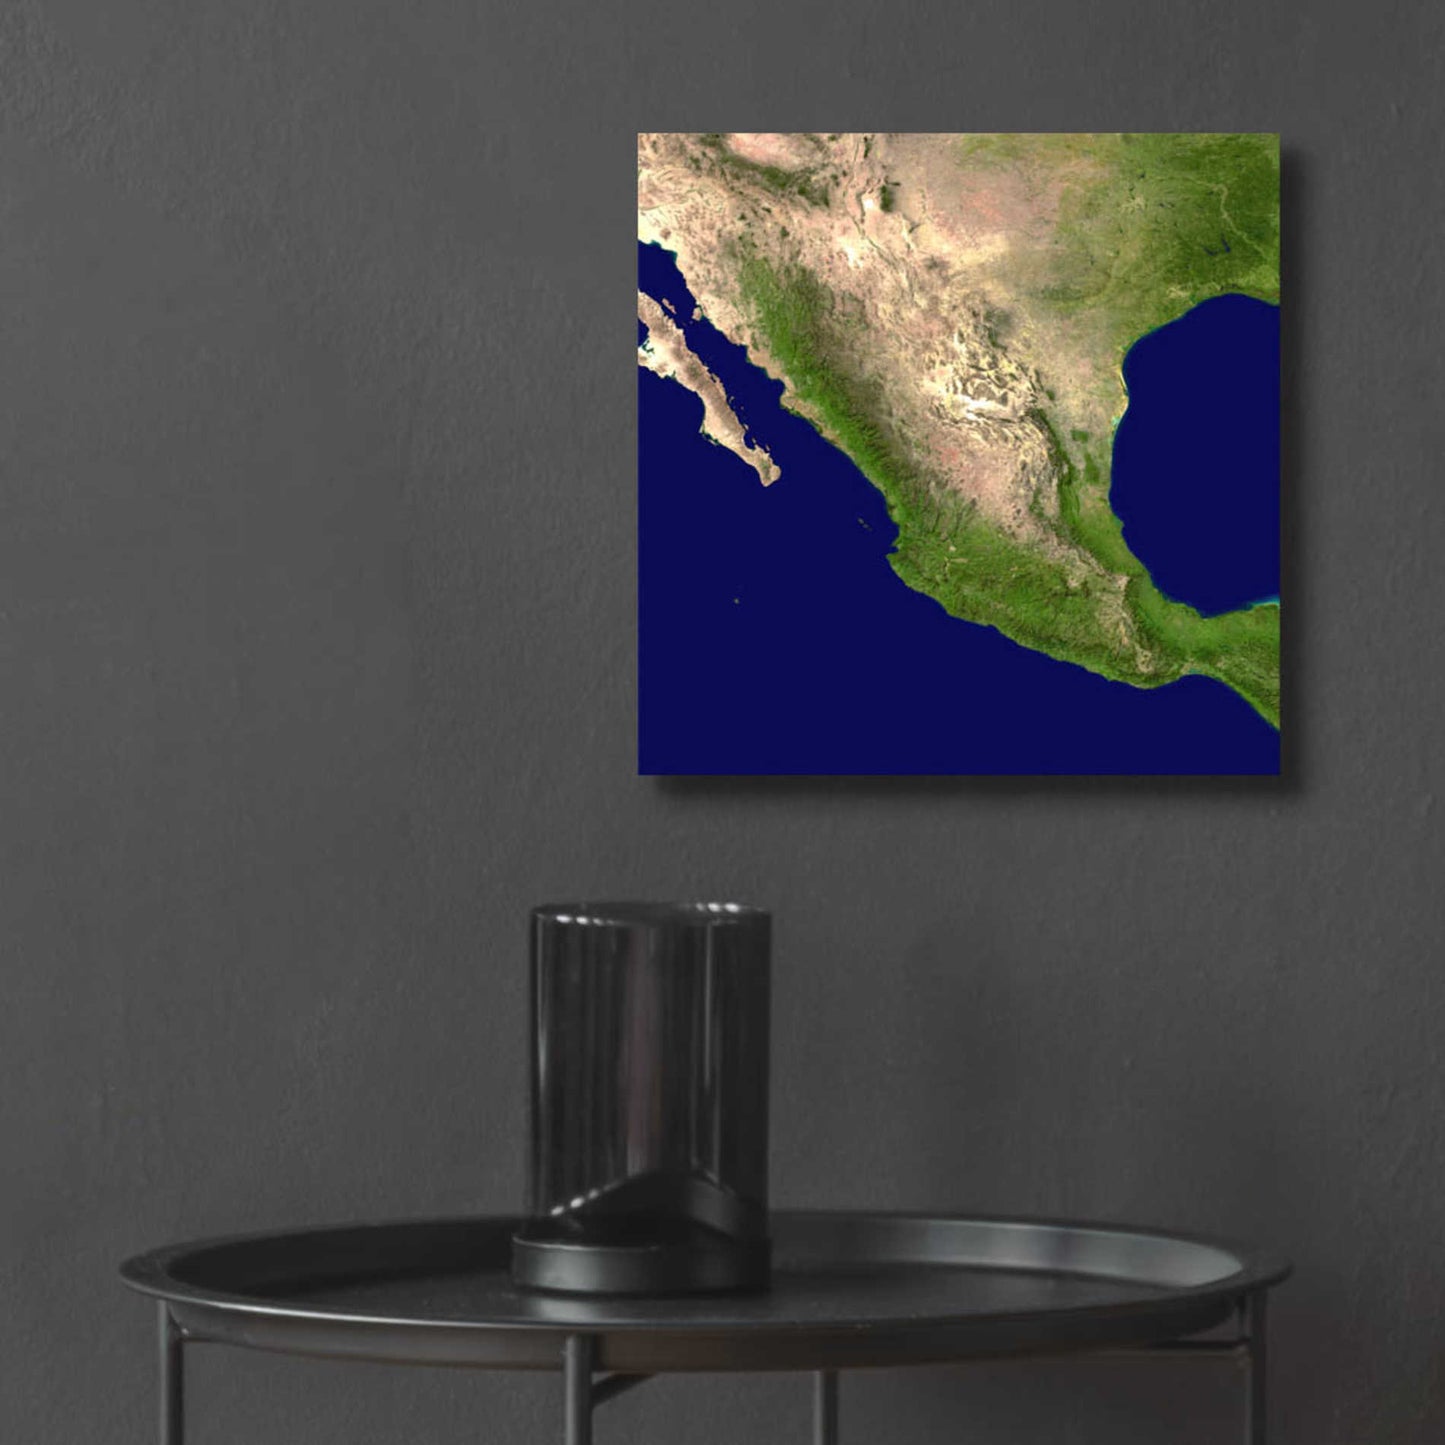 Epic Art 'Earth as Art: Mexico and Central America' Acrylic Glass Wall Art,12x12